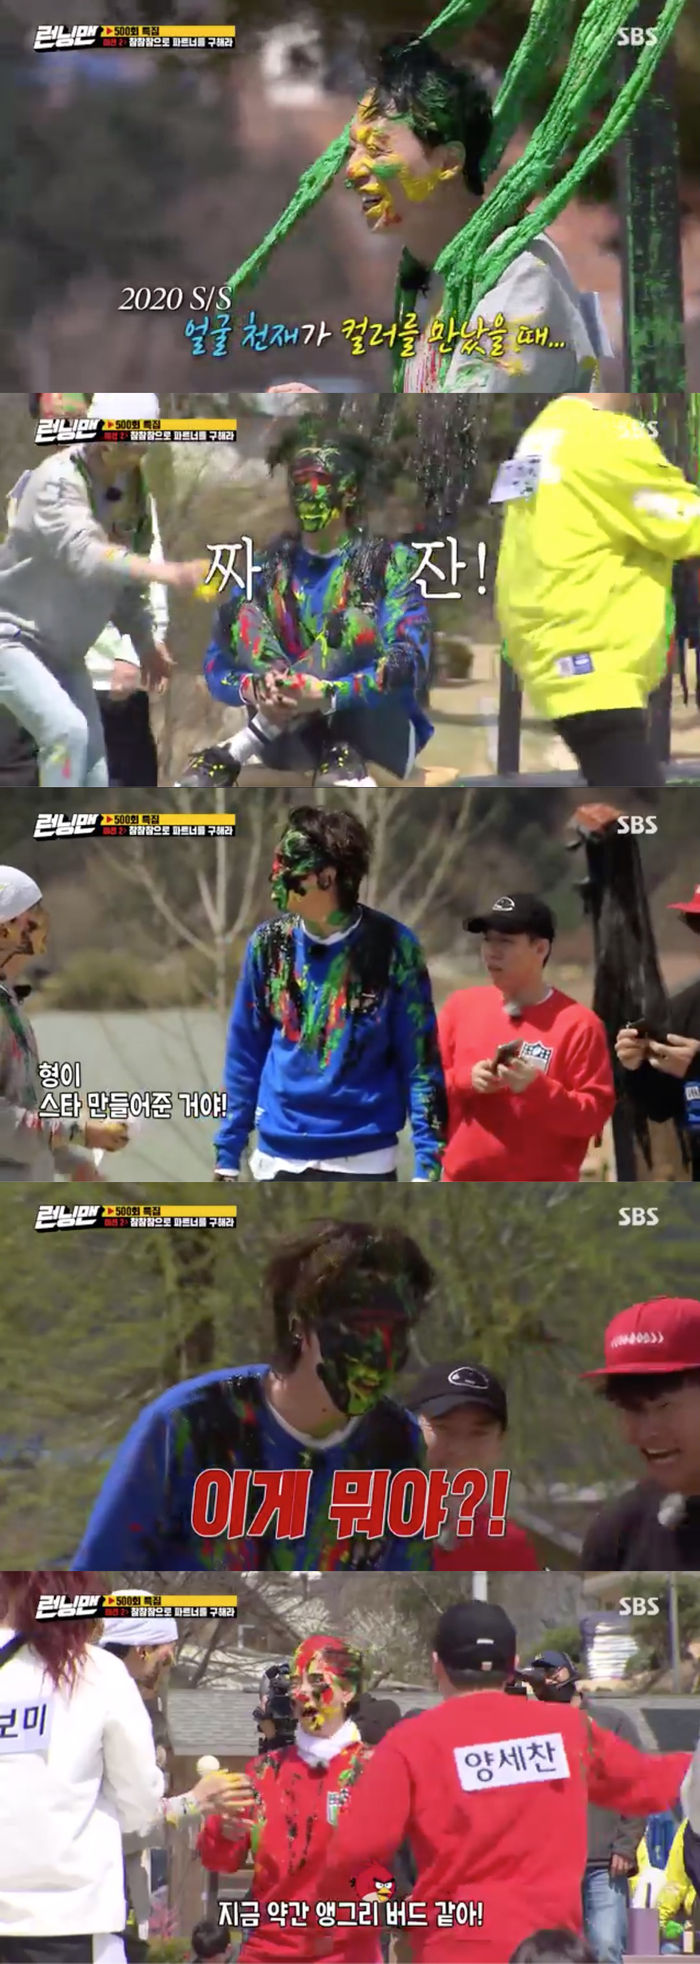 Running Man members transformed into paint MonsterSBS Running Man, which was broadcast on the 26th, was featured in commemoration of 500 times.On this day, we performed a game to save our partner from the conveyor belt of the paint.Yoo Jae-Suk and Choi Yoo-jung became partners and went on to game.Despite Choi Yoo-jungs true-earth battle, Yoo Jae-Suk was covered in paint and laughed.The members who saw it laughed at the face of Yoo Jae-Suk, saying, Its a mess. Then Yoo Jae-Suk complained, Is not it too fast?So, Ji Suk-jin is on the move.The two big brothers proposed a rematch of Lee Kwang-soo, who had a slow pace of toxicity, and the production team embarrassed Lee Kwang-soo by saying, Lee Kwang-soo has not done it yet.Lee Kwang-soo said, I didnt do it? Its weird. I think I did this. But he climbed on the conveyor belt and caught his eye.The conveyor belt with Lee Kwang-soo moved at the highest speed, and members such as Yoo Jae-Suk, Haha, and Ji Suk-jin added Lee Kwang-soos face to the paint.Kim Jong Kook laughed at Lee Kwang-soos face, saying, Is not that when you take a decal comani? Yoo Jae-Suk said, My brother made you a star.After that, Song Ji-hyo was tempted by Yang Se-chan and climbed on the conveyor belt, and became a paint-covered thanks to Yang Se-chan, who did not finish the true true spell in line with the Americas.So Song Ji-hyo burst out with a bad word toward Yang Se-chan, and Yoo Jae-Suk, who saw it, said, You are like Angry Bird.